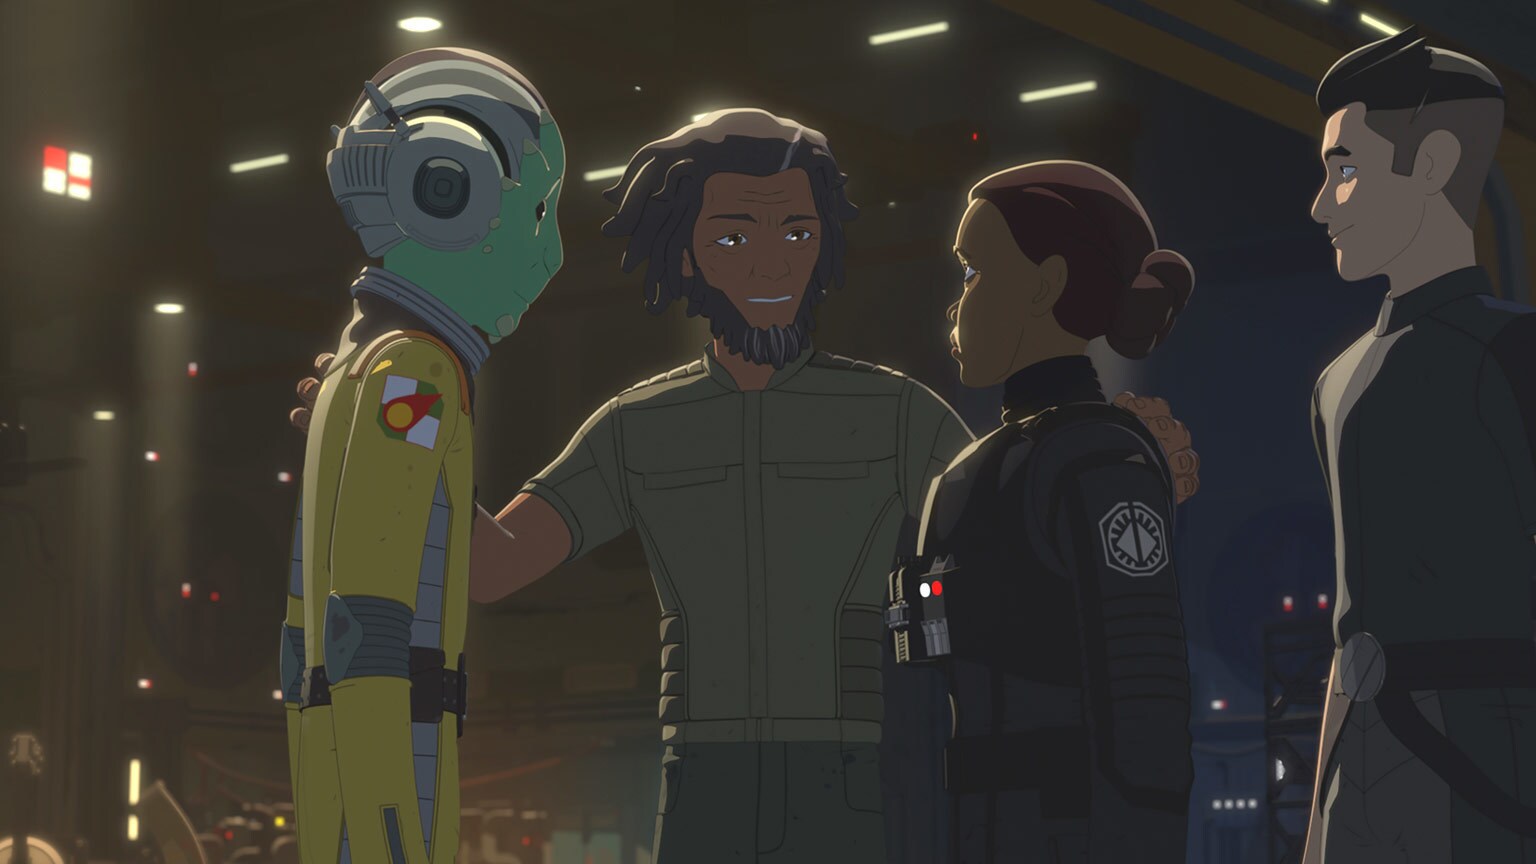 Bucket's List Extra: 5 Fun Facts from "The Escape - Part 2" - Star Wars Resistance